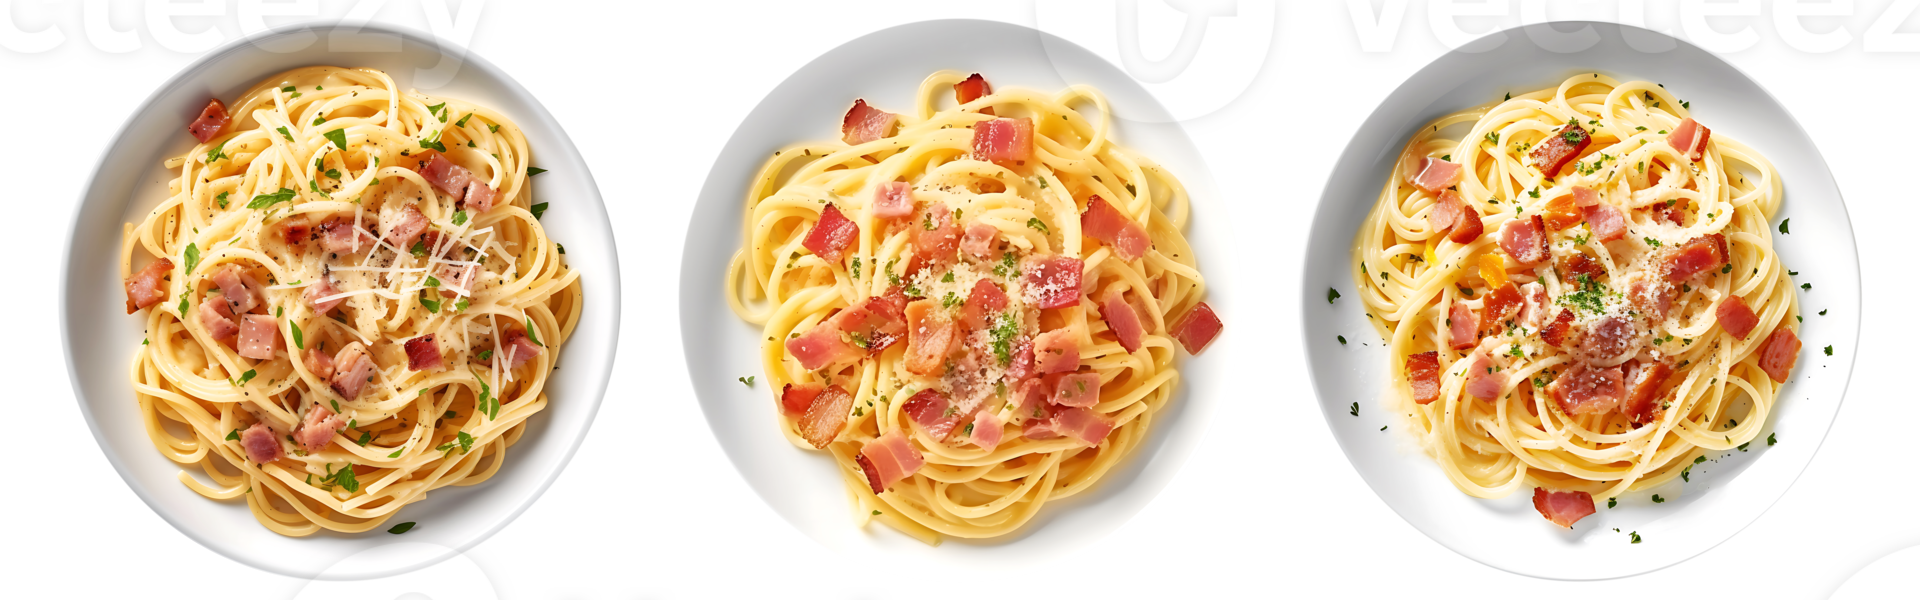 Spaghetti Carbonara on white bowl, top view with transparent background, Technology png